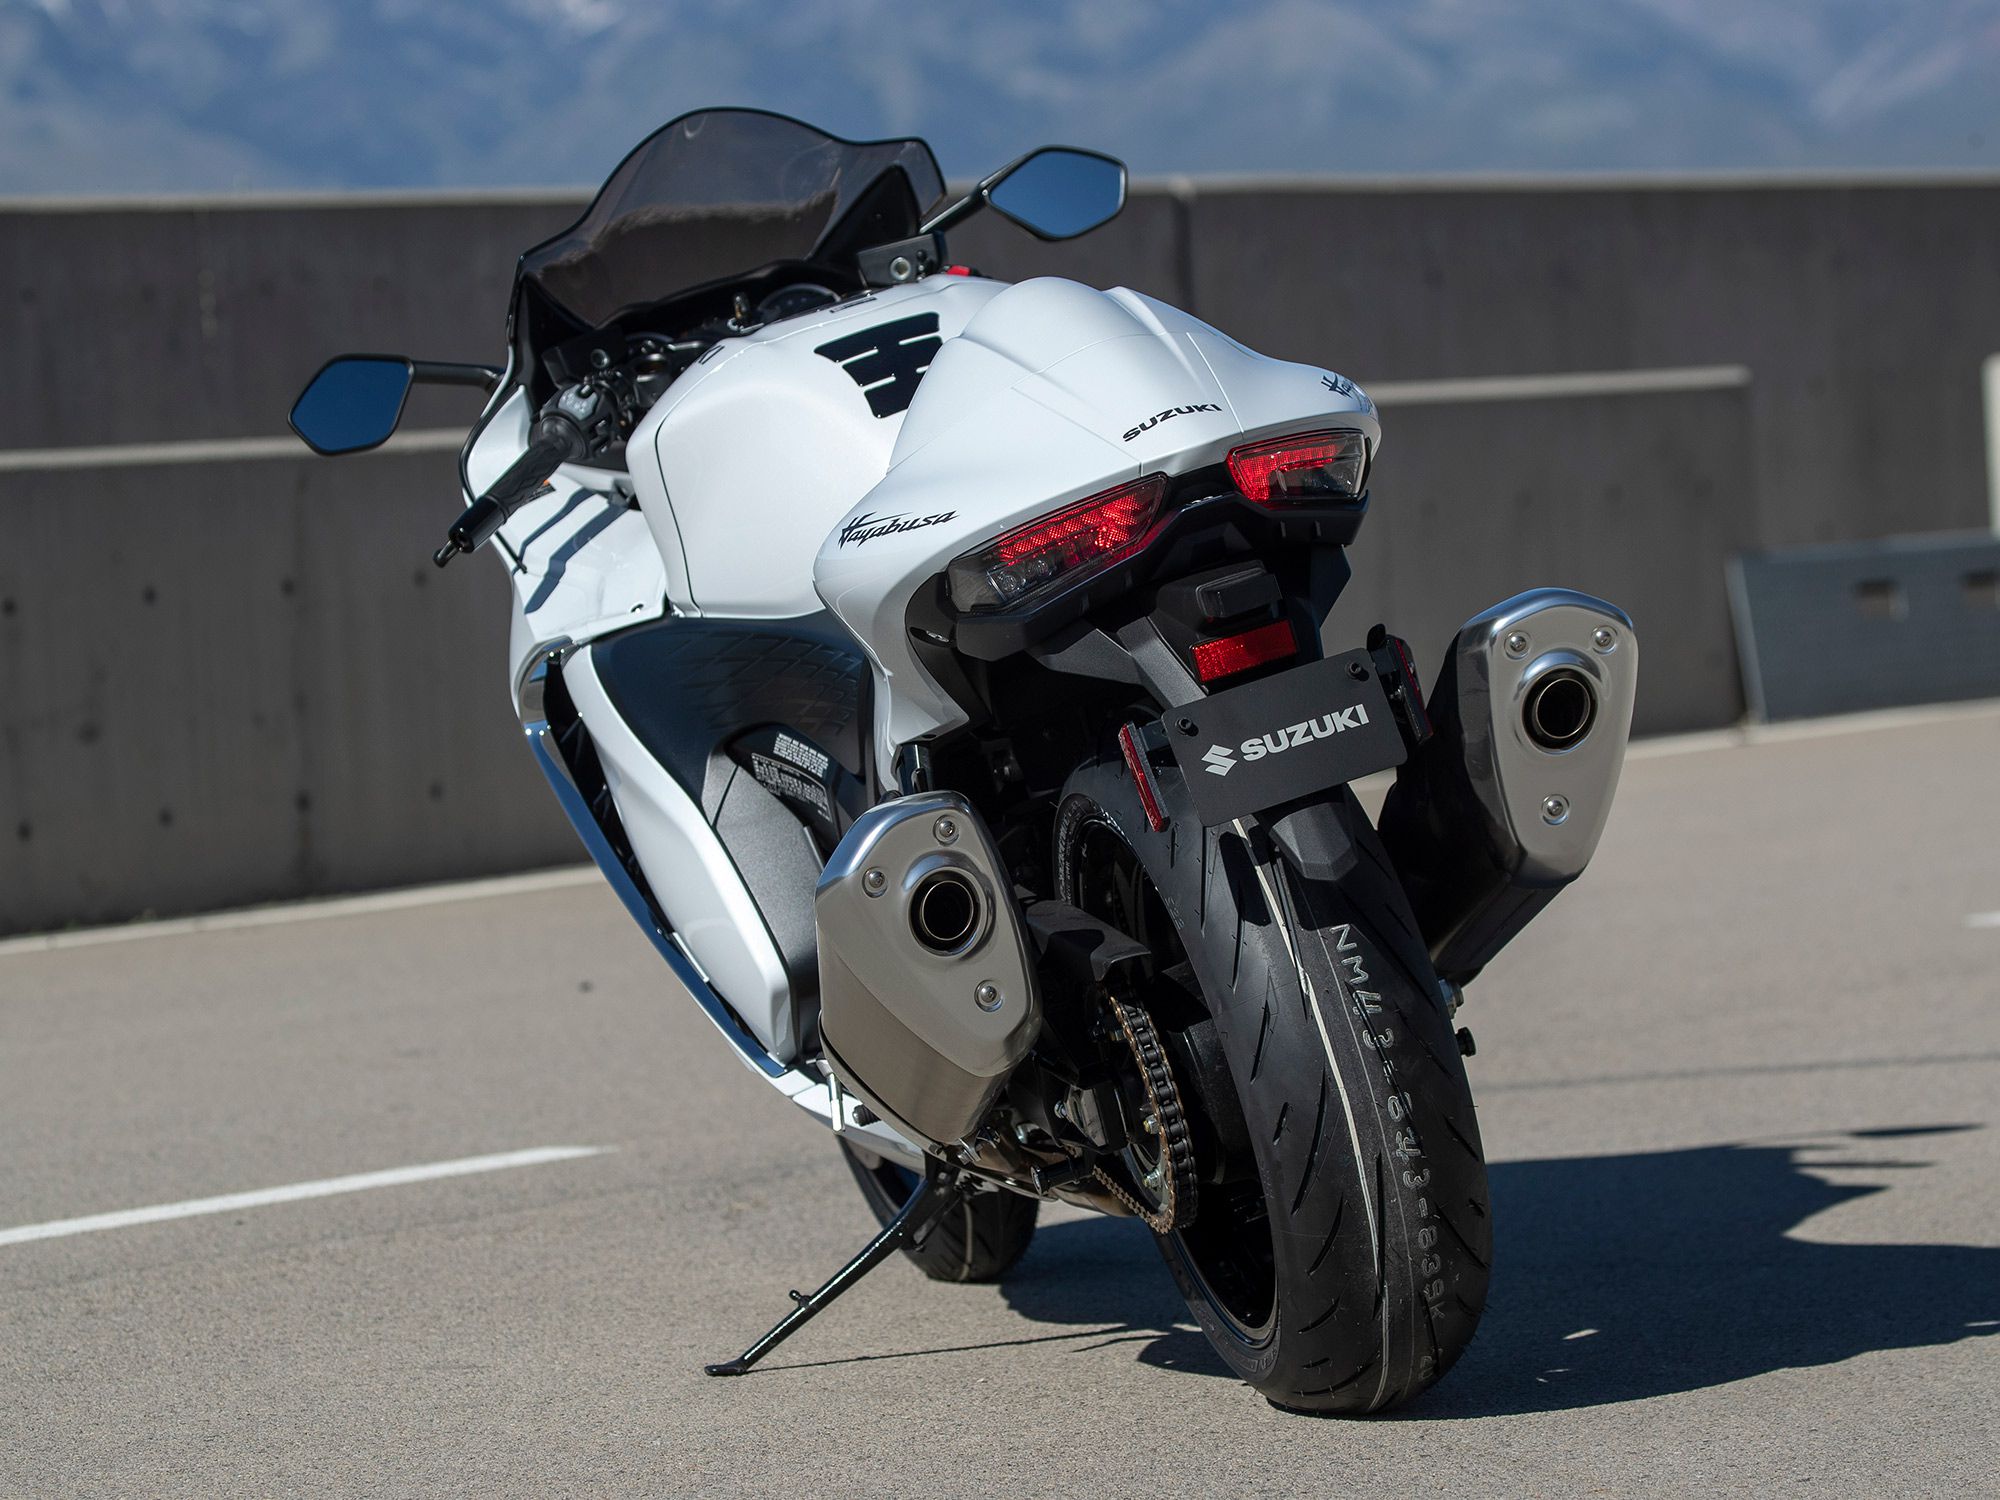 Leaner and meaner, the Hayabusa is sure to turn heads with its wind-tunnel-born styling.